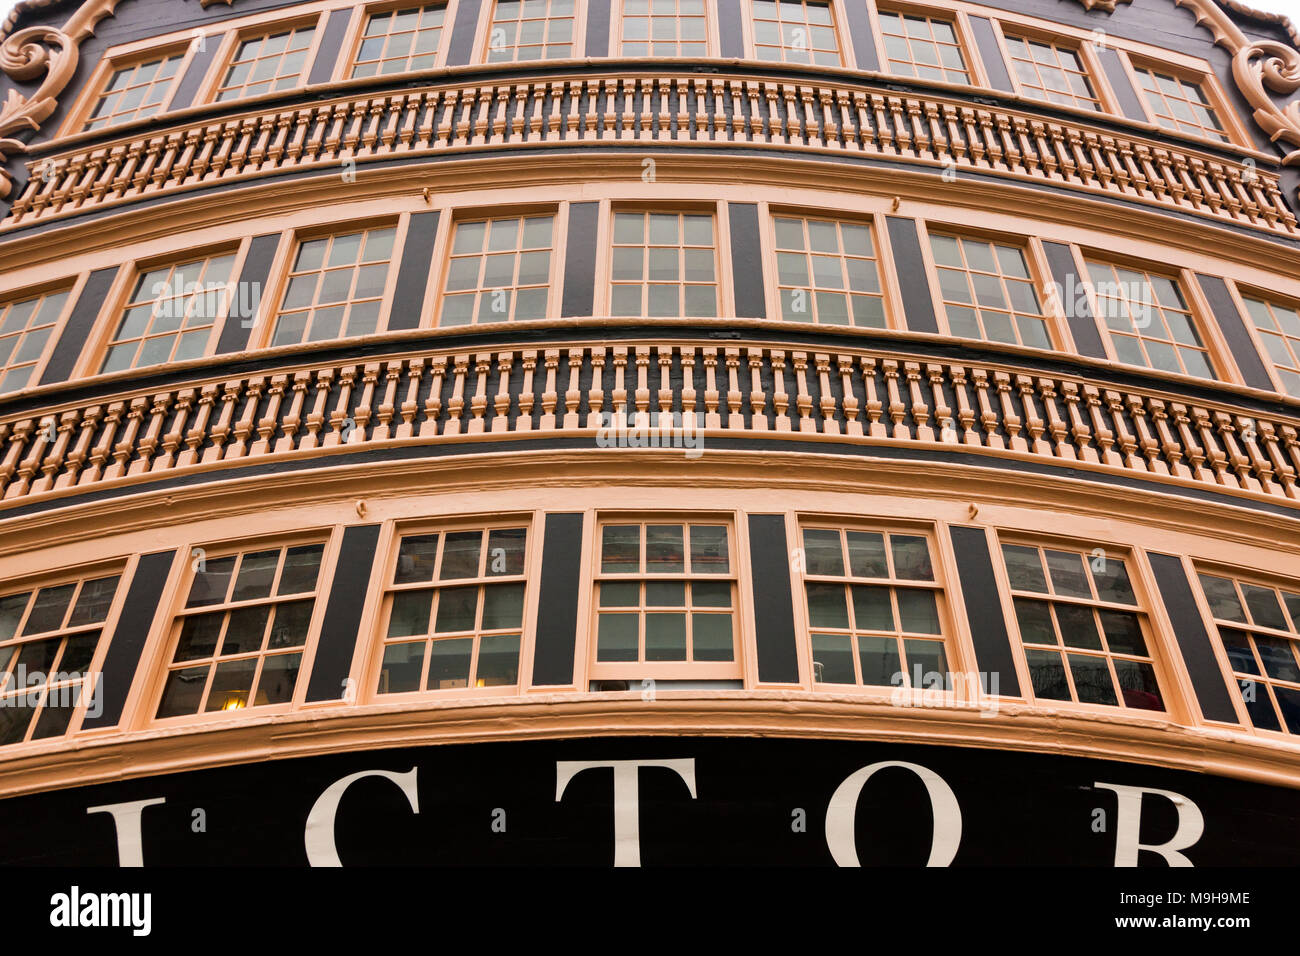 Windows at back / aft (stern galleries / gallery) of Admiral Lord Nelson 's flagship HMS Victory. Portsmouth Historic Dockyard / Dockyards UK (95) Stock Photo